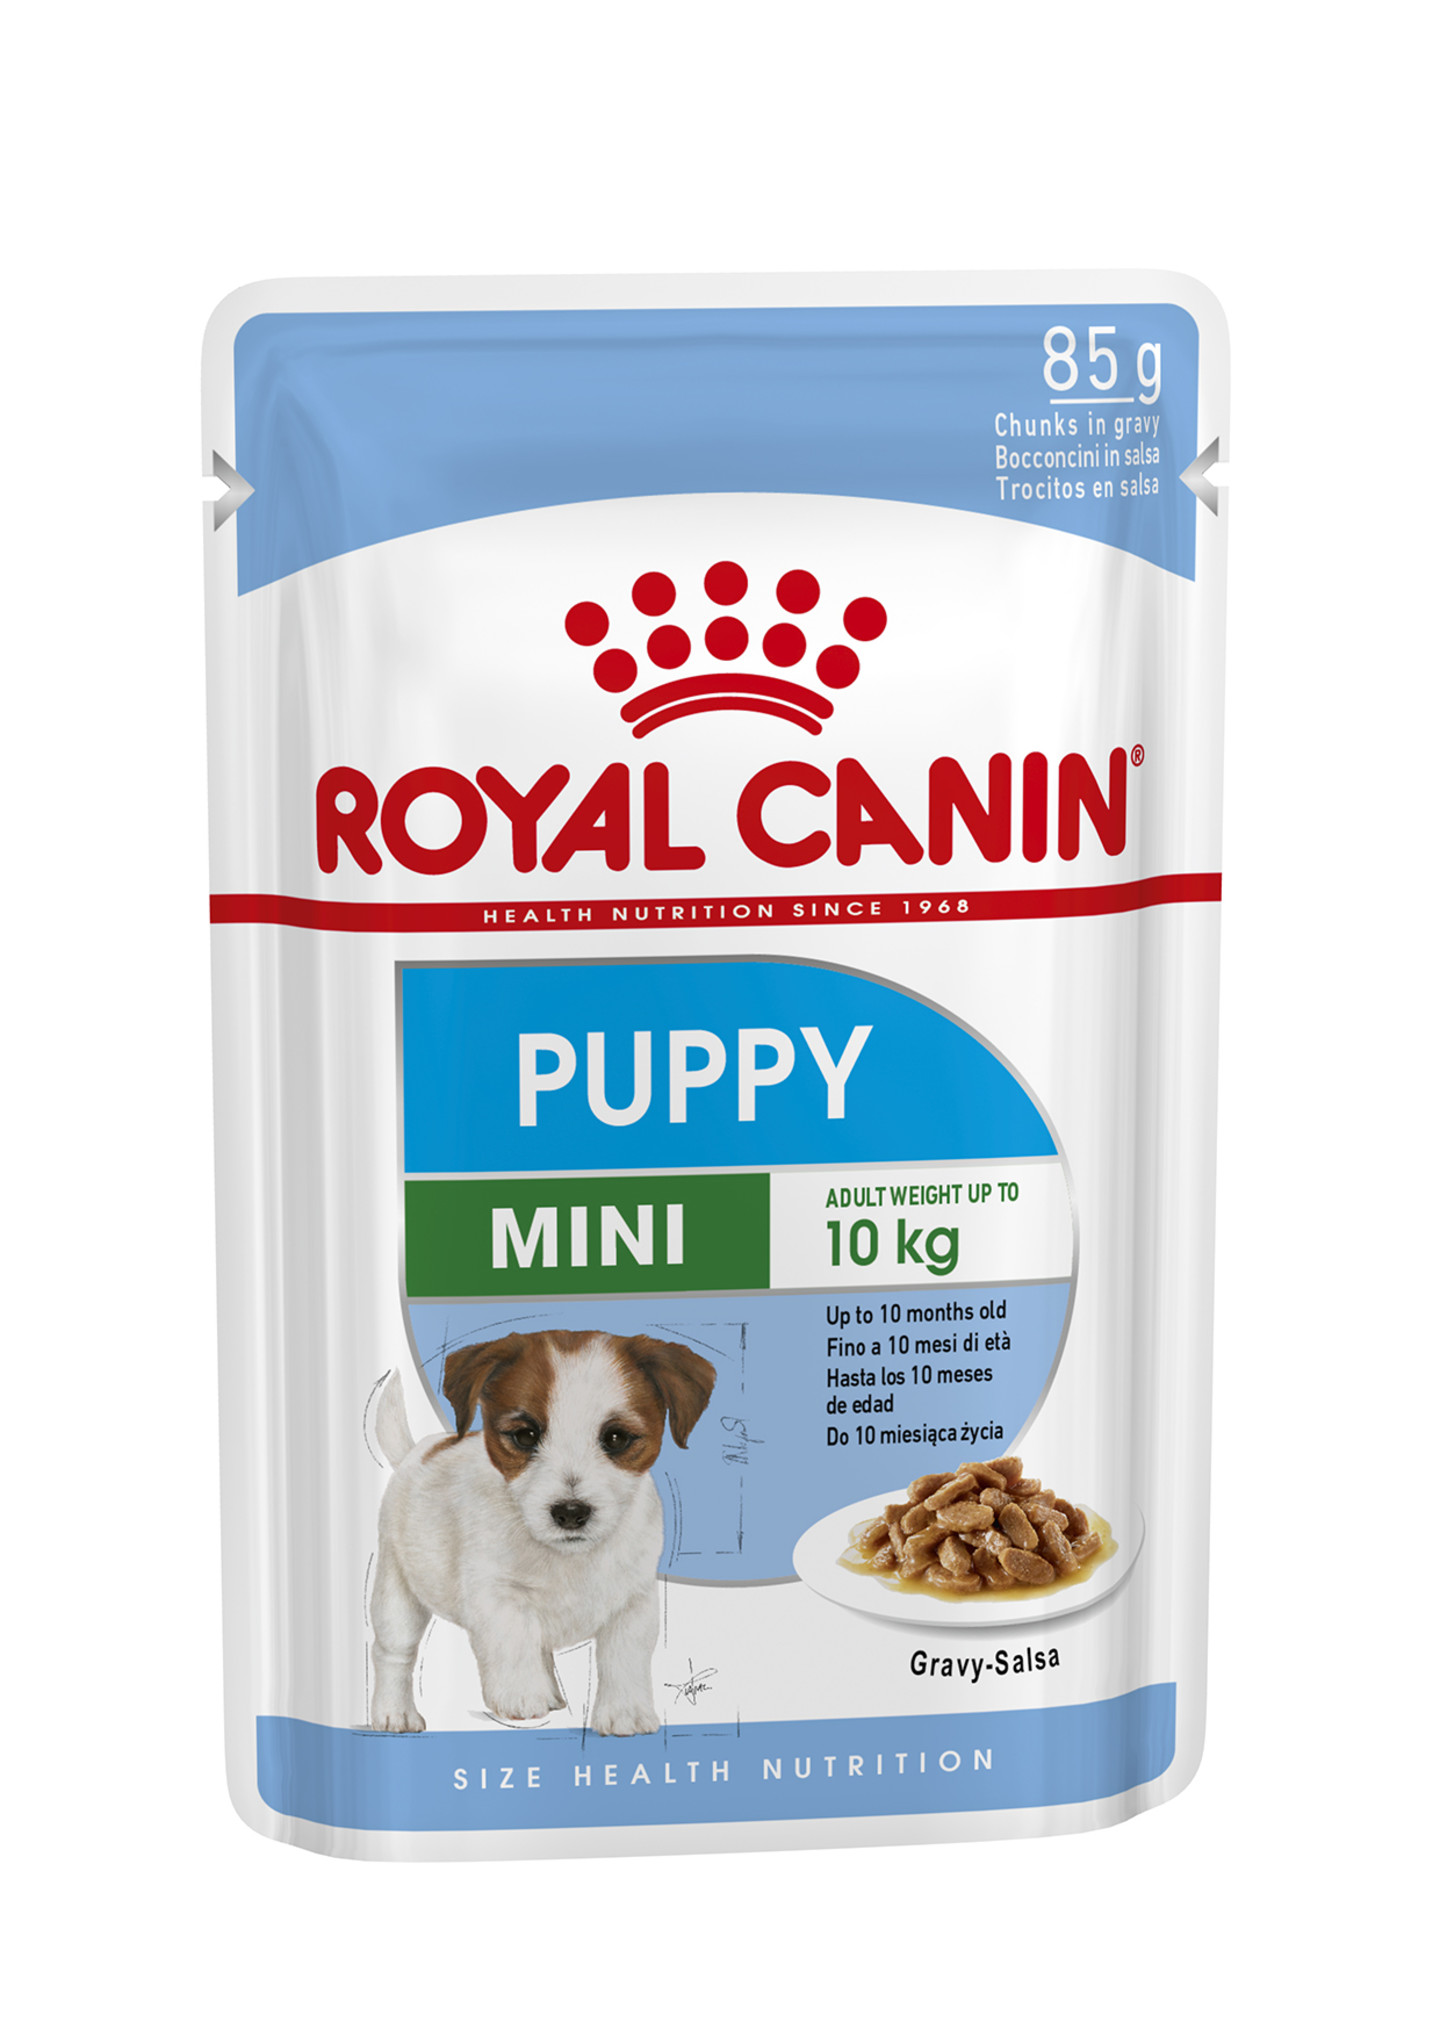 Dog Retail Products Royal Canin